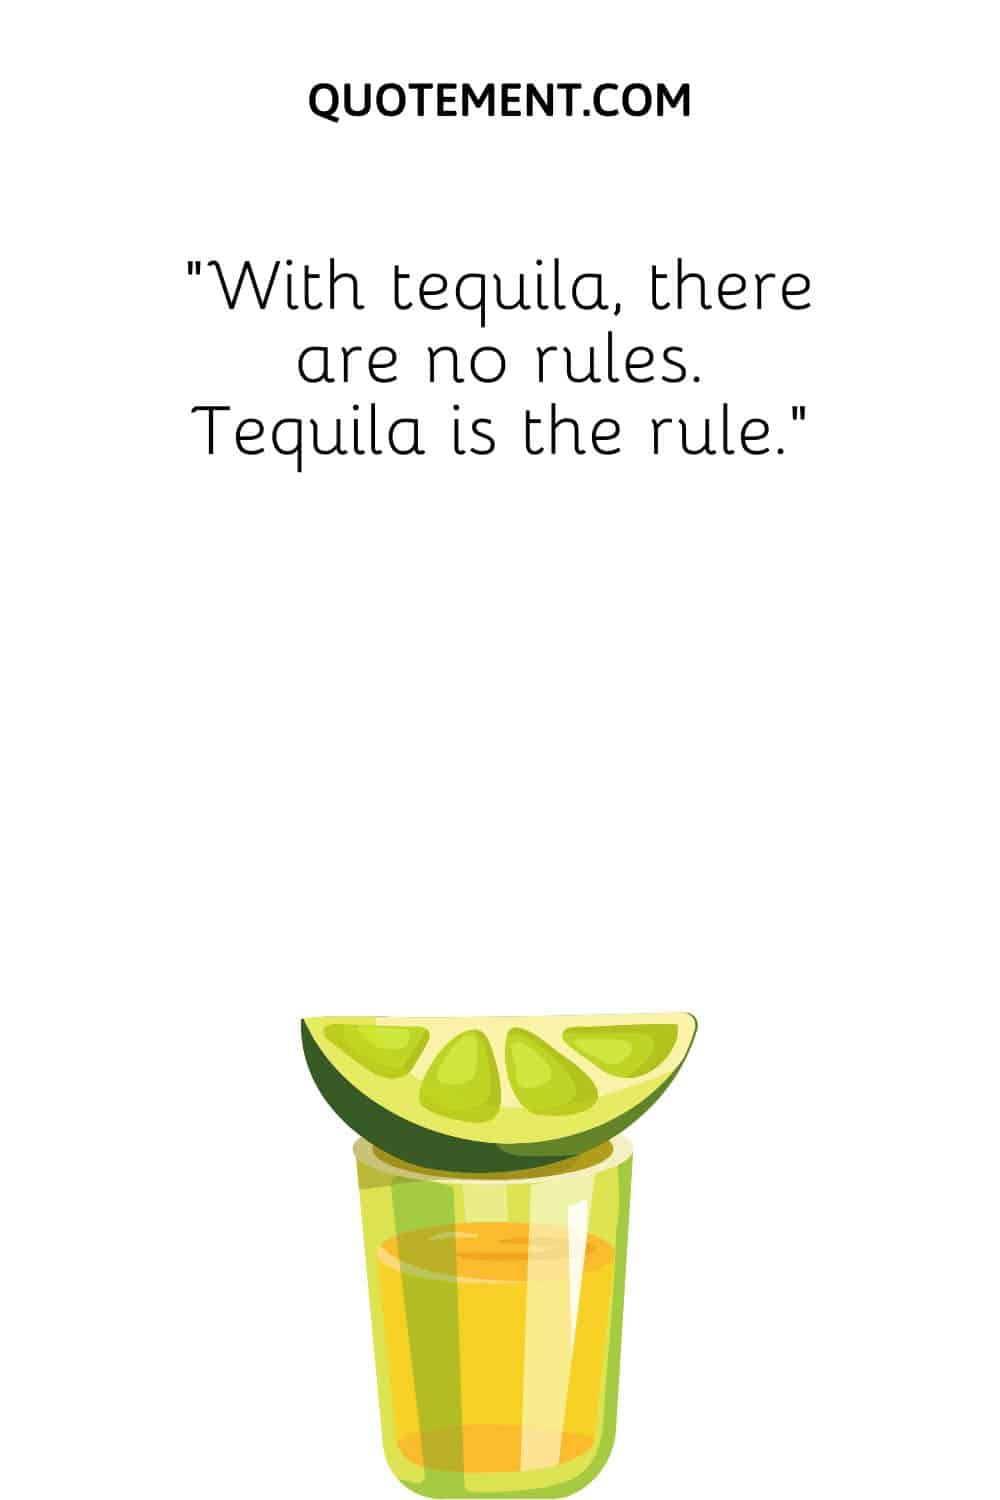 With tequila, there are no rules